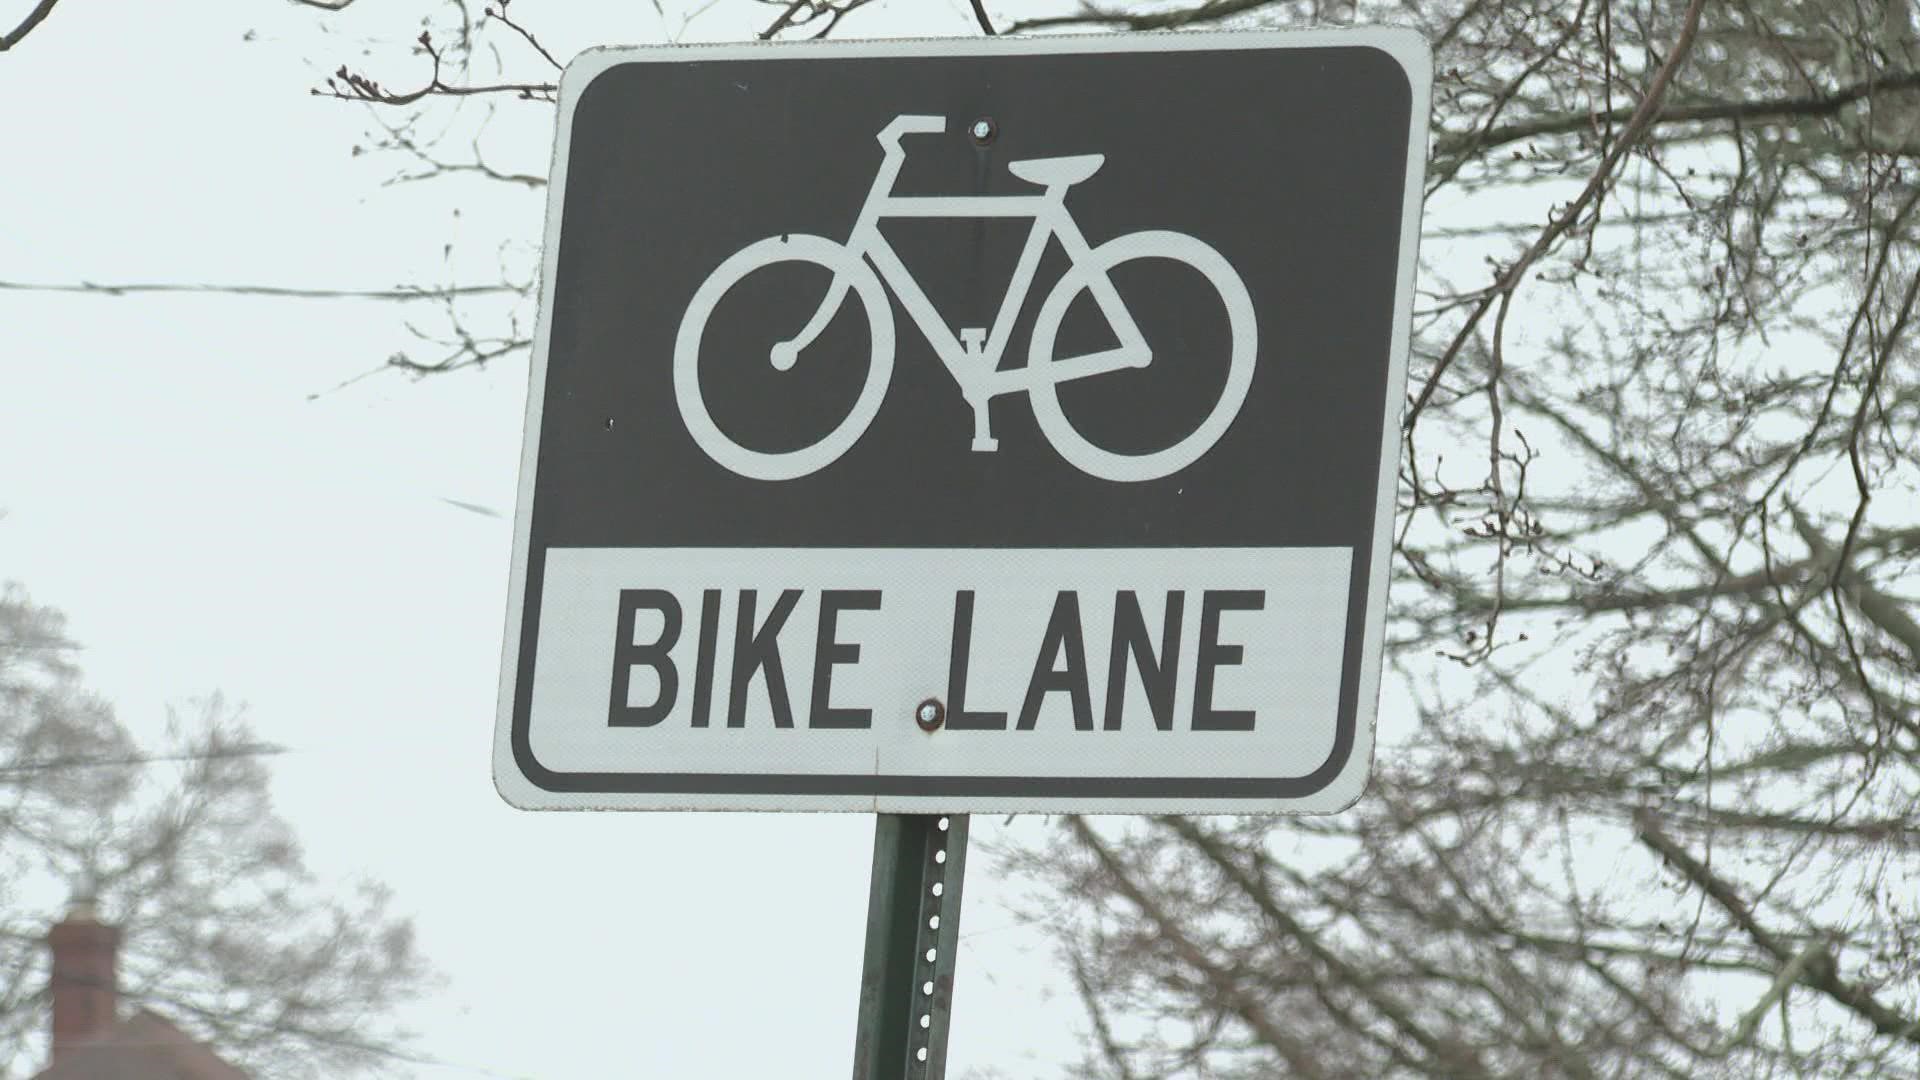 City leaders are hoping to hear from riders about which areas it should prioritize.